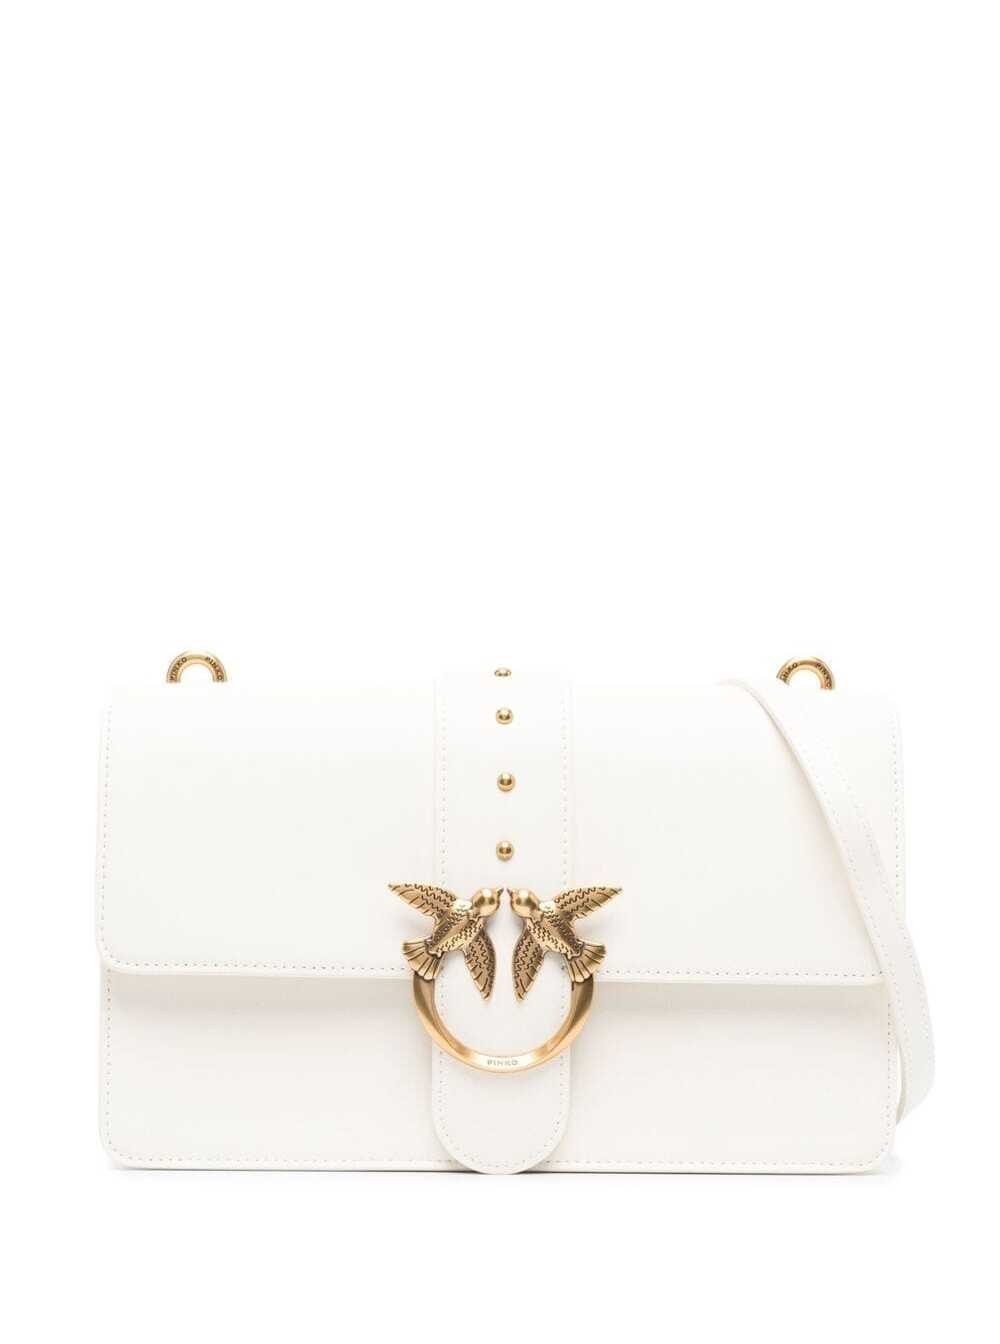 PINKO CLASSIC LOVE BAG ICON WHITE SHOULDER BAG WITH LOGO PATCH IN SMOOTH LEATHER WOMAN